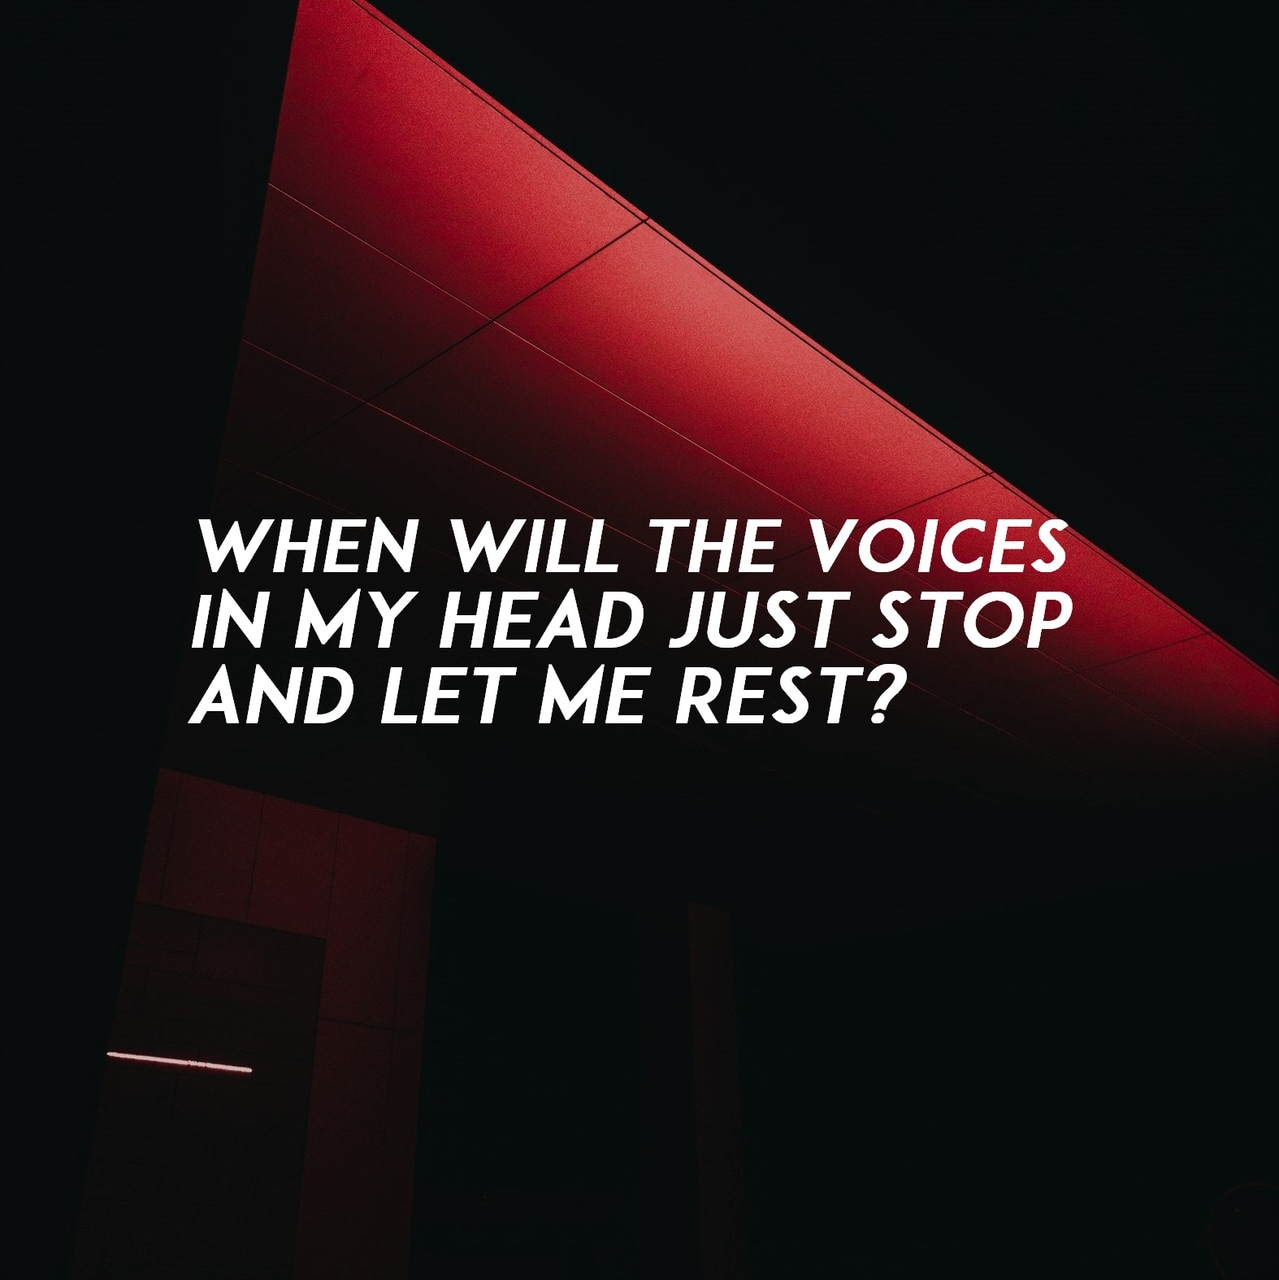 Quotes, Voices And Song Lyrics - 3d Exhibition Design - HD Wallpaper 